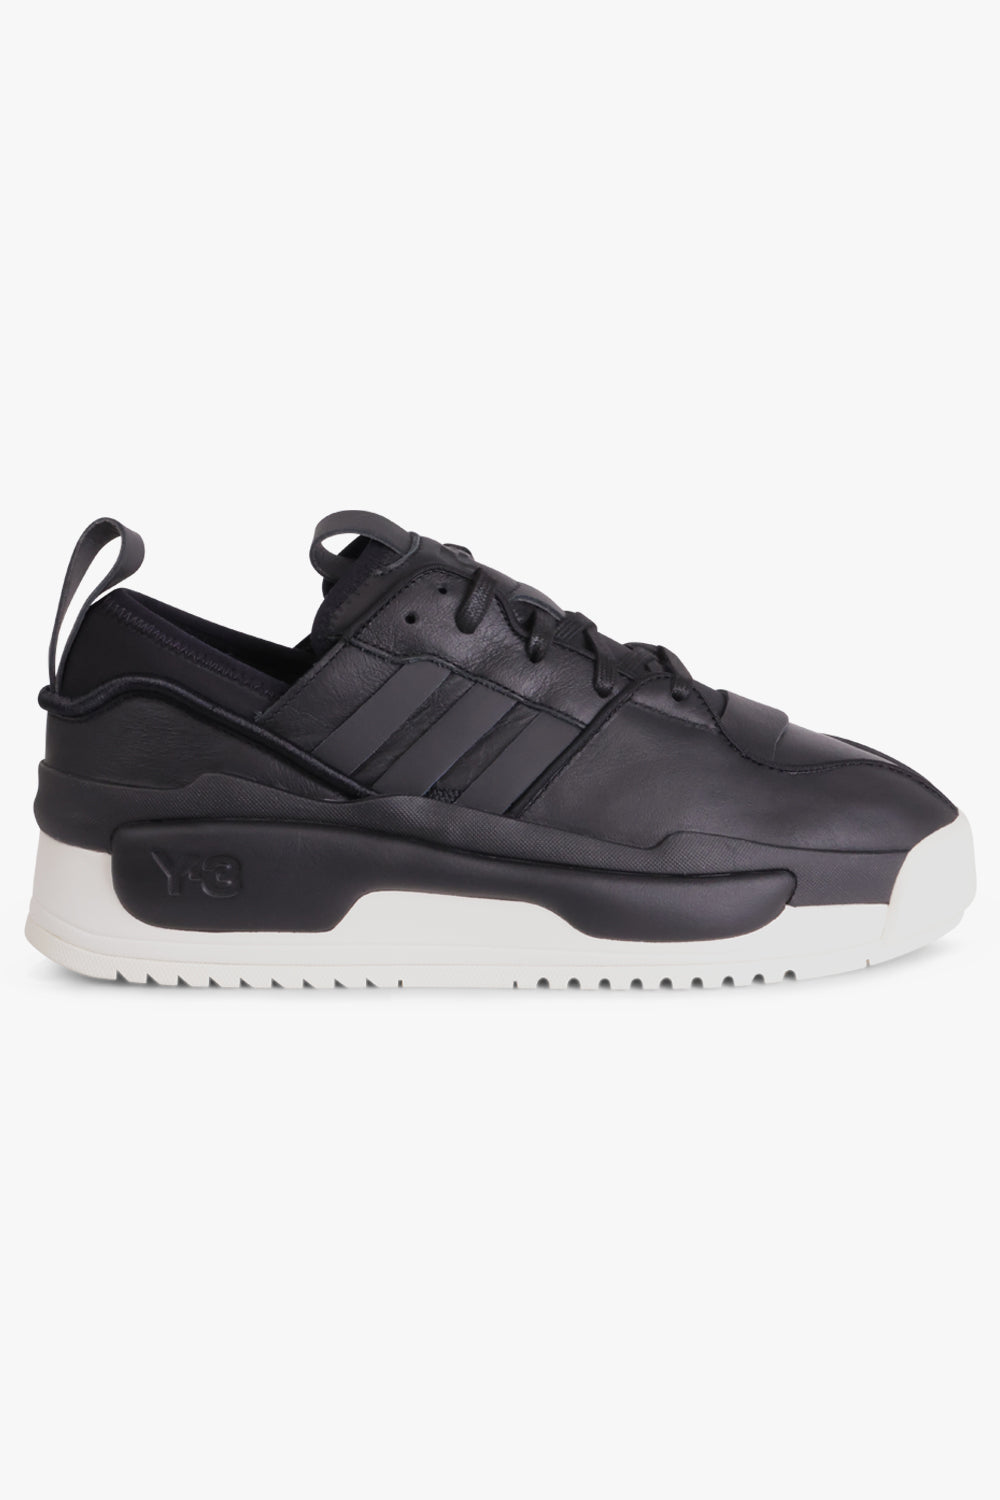 Y-3 SHOES Rivalry Sneaker | Black/Off White